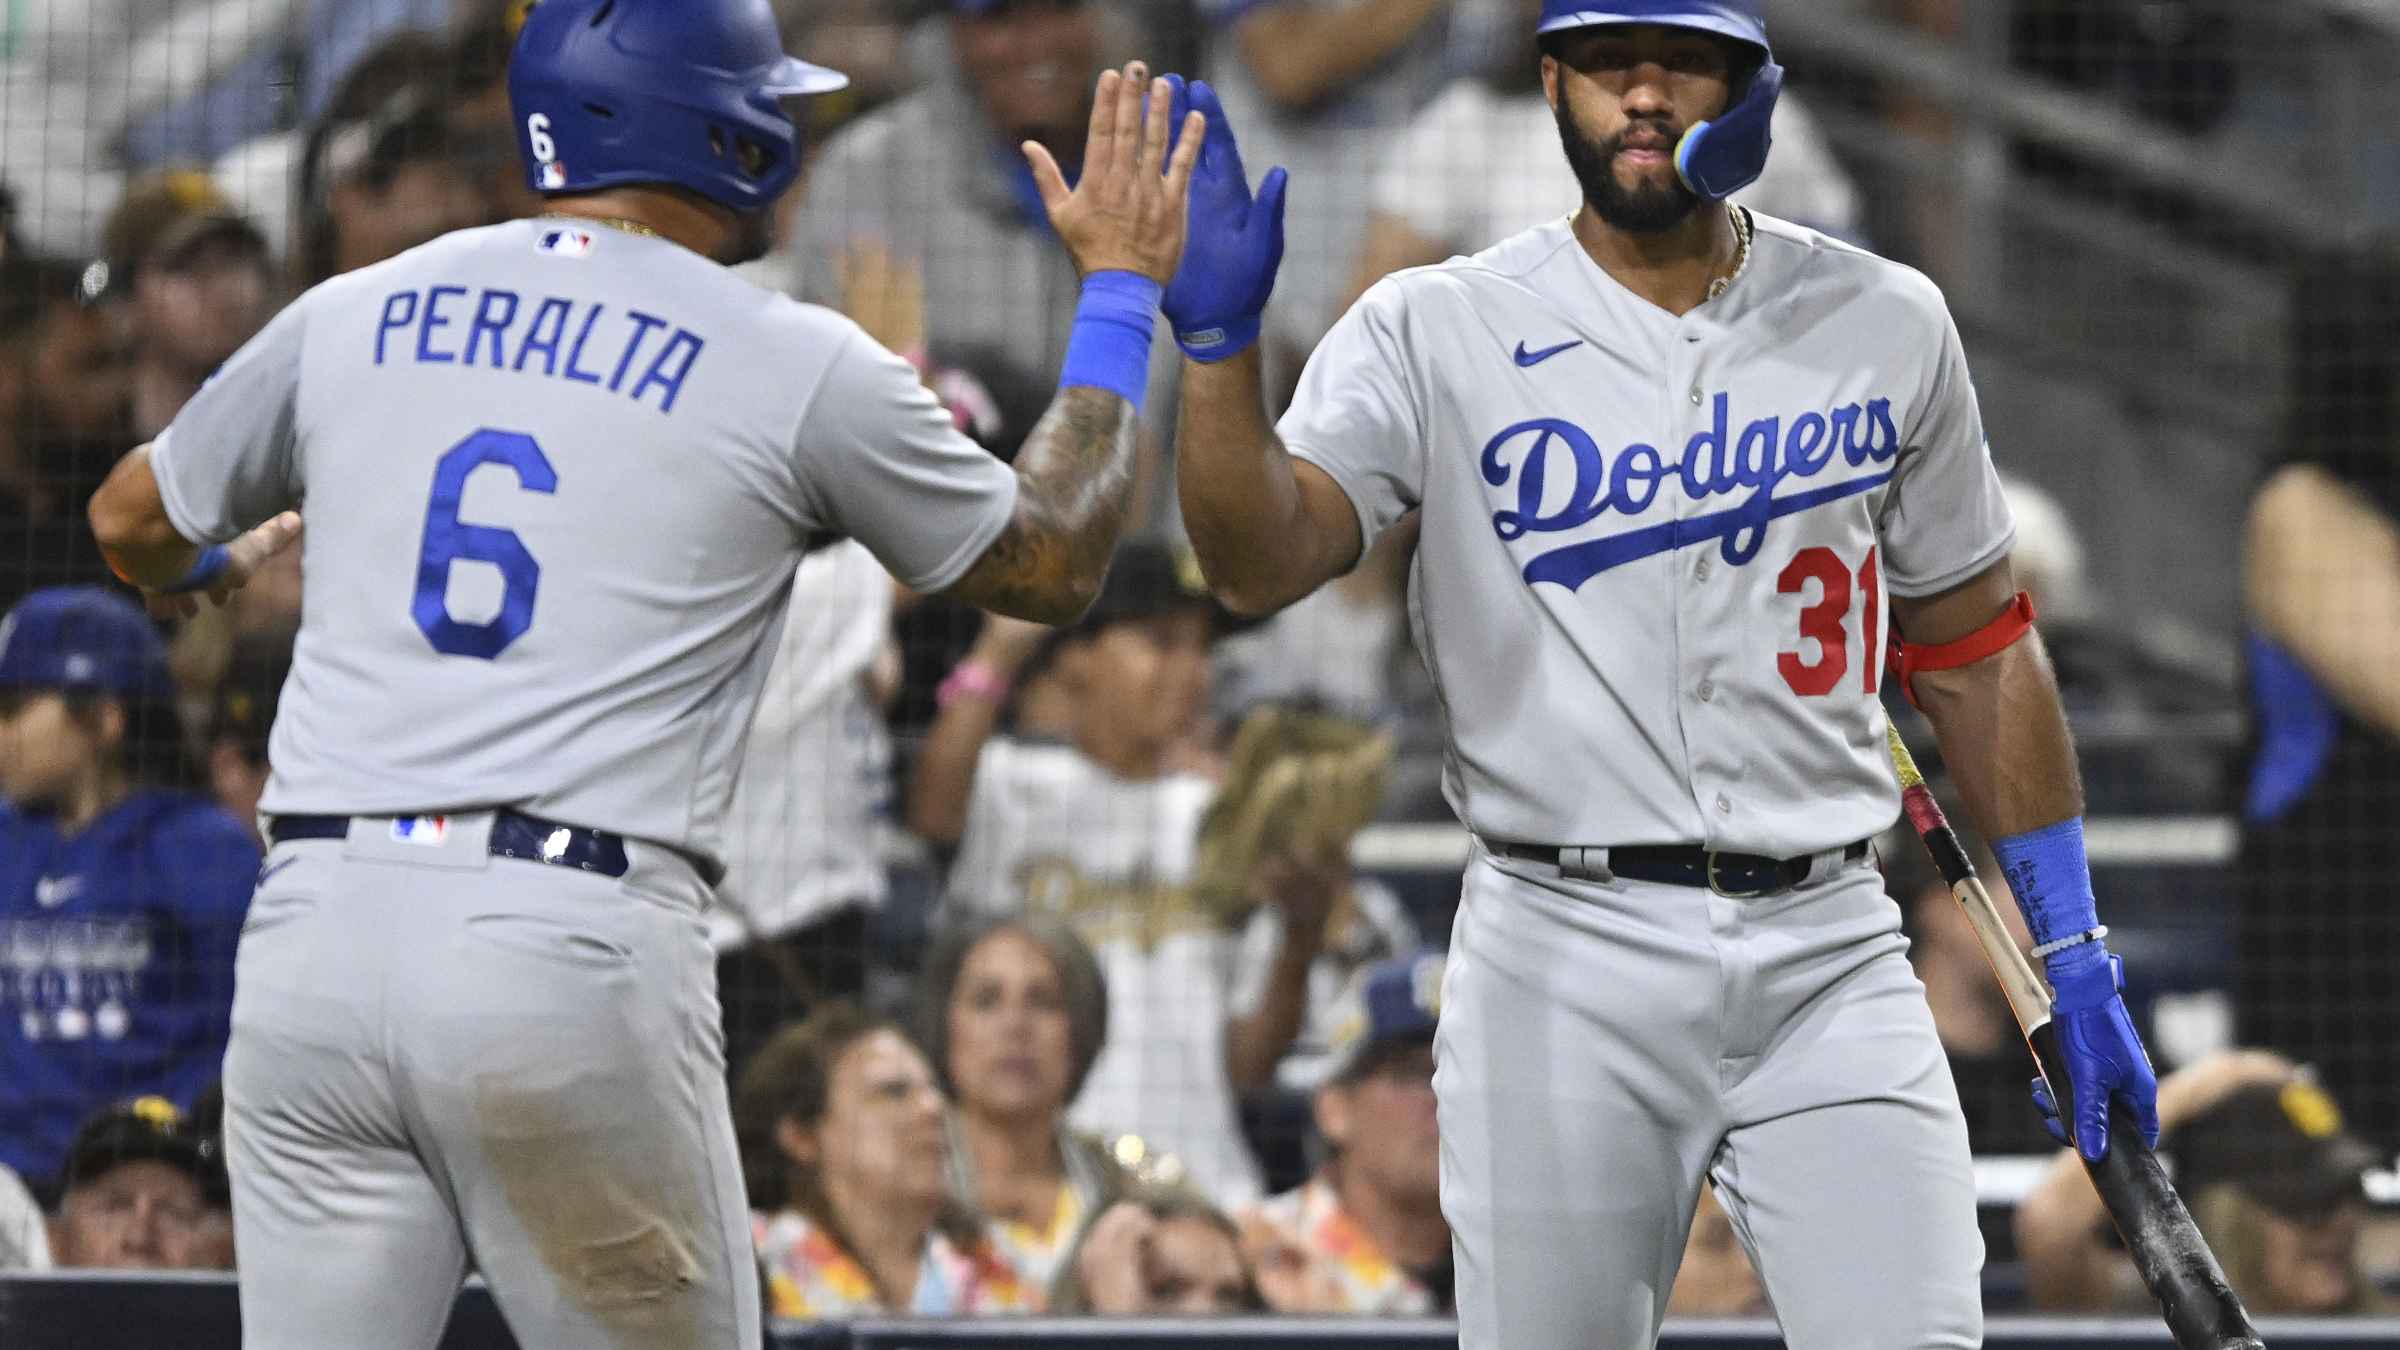 MLB Gameday: Dodgers 4, Padres 5 Final Score (08/03/2020)